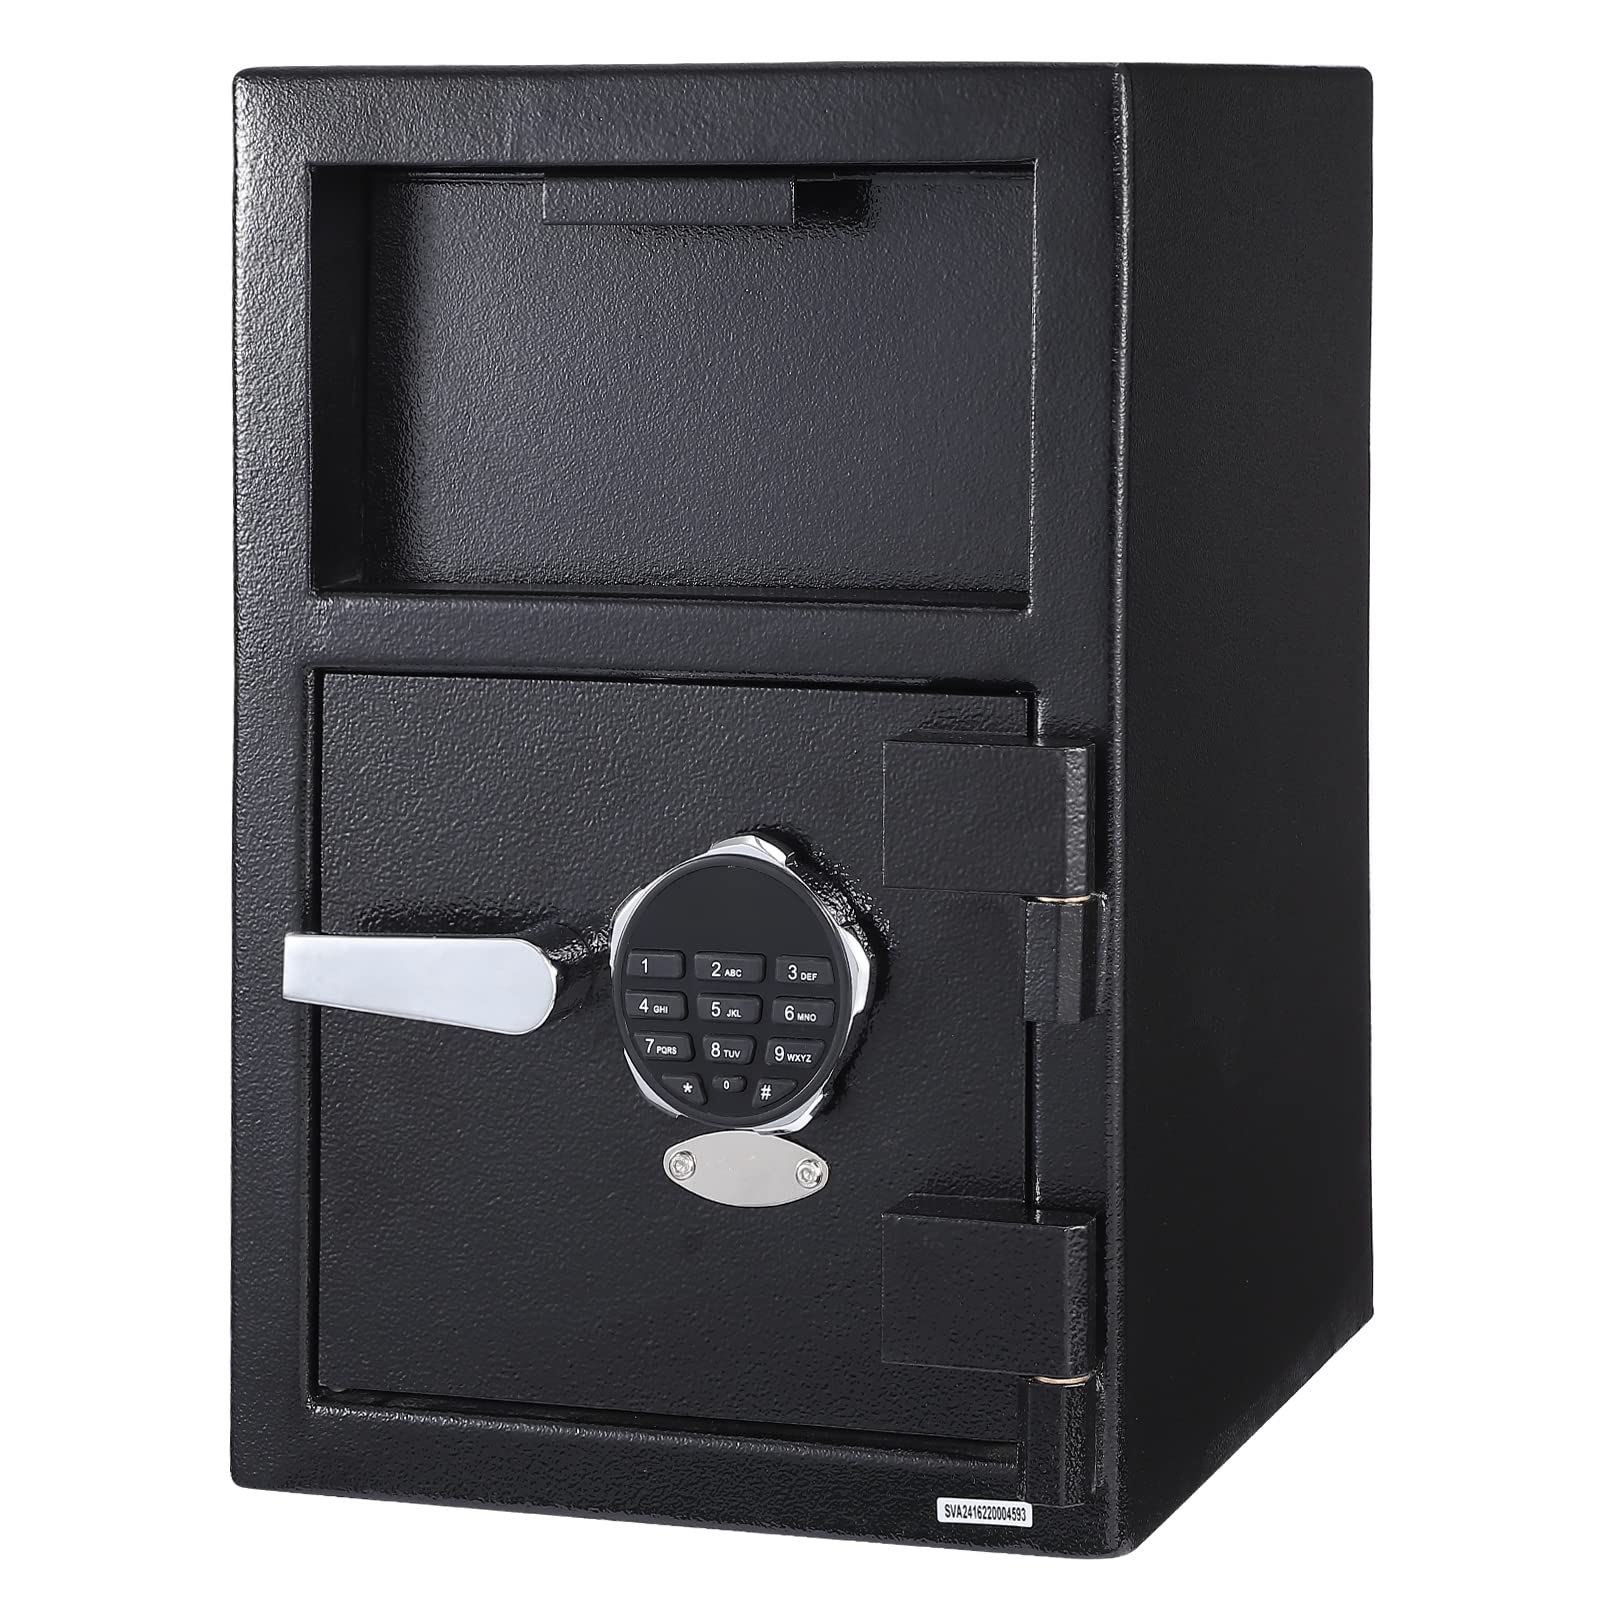 Depository Safe Digital Depository Safe Box, 13.7'' X 15.7'' X 19.2'' Electronic Steel Safe with Keypad, Locking Drop Box with Slot, Metal Lock Box with Two Emergency Keys for Your Valuables